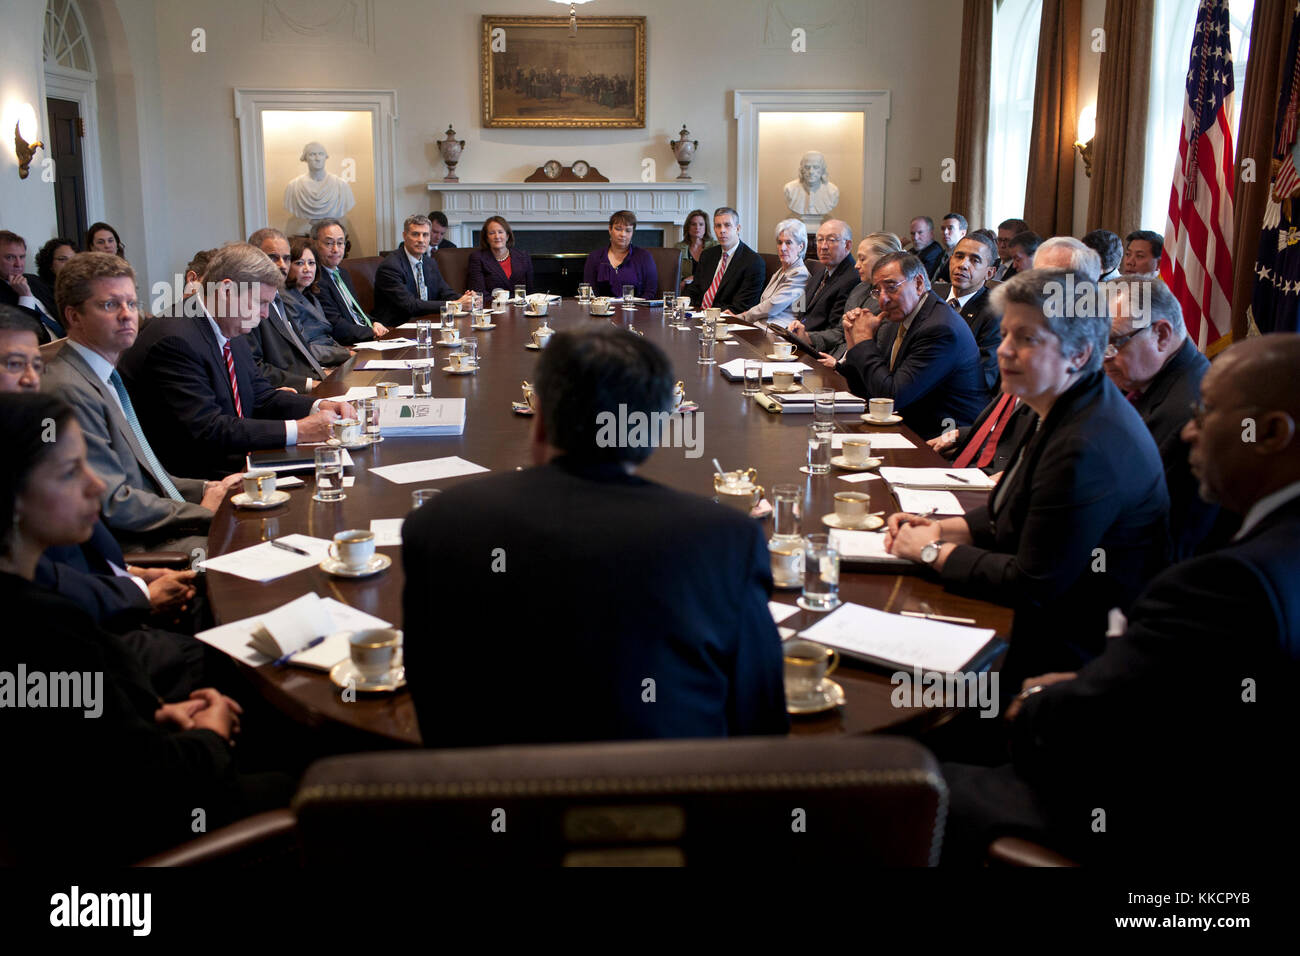 President Barack Obama and others listen as Chief of Staff Jack Lew, center, speaks during a Cabinet meeting in the Cabinet Room of the White House, Jan. 31, 2012. Stock Photo